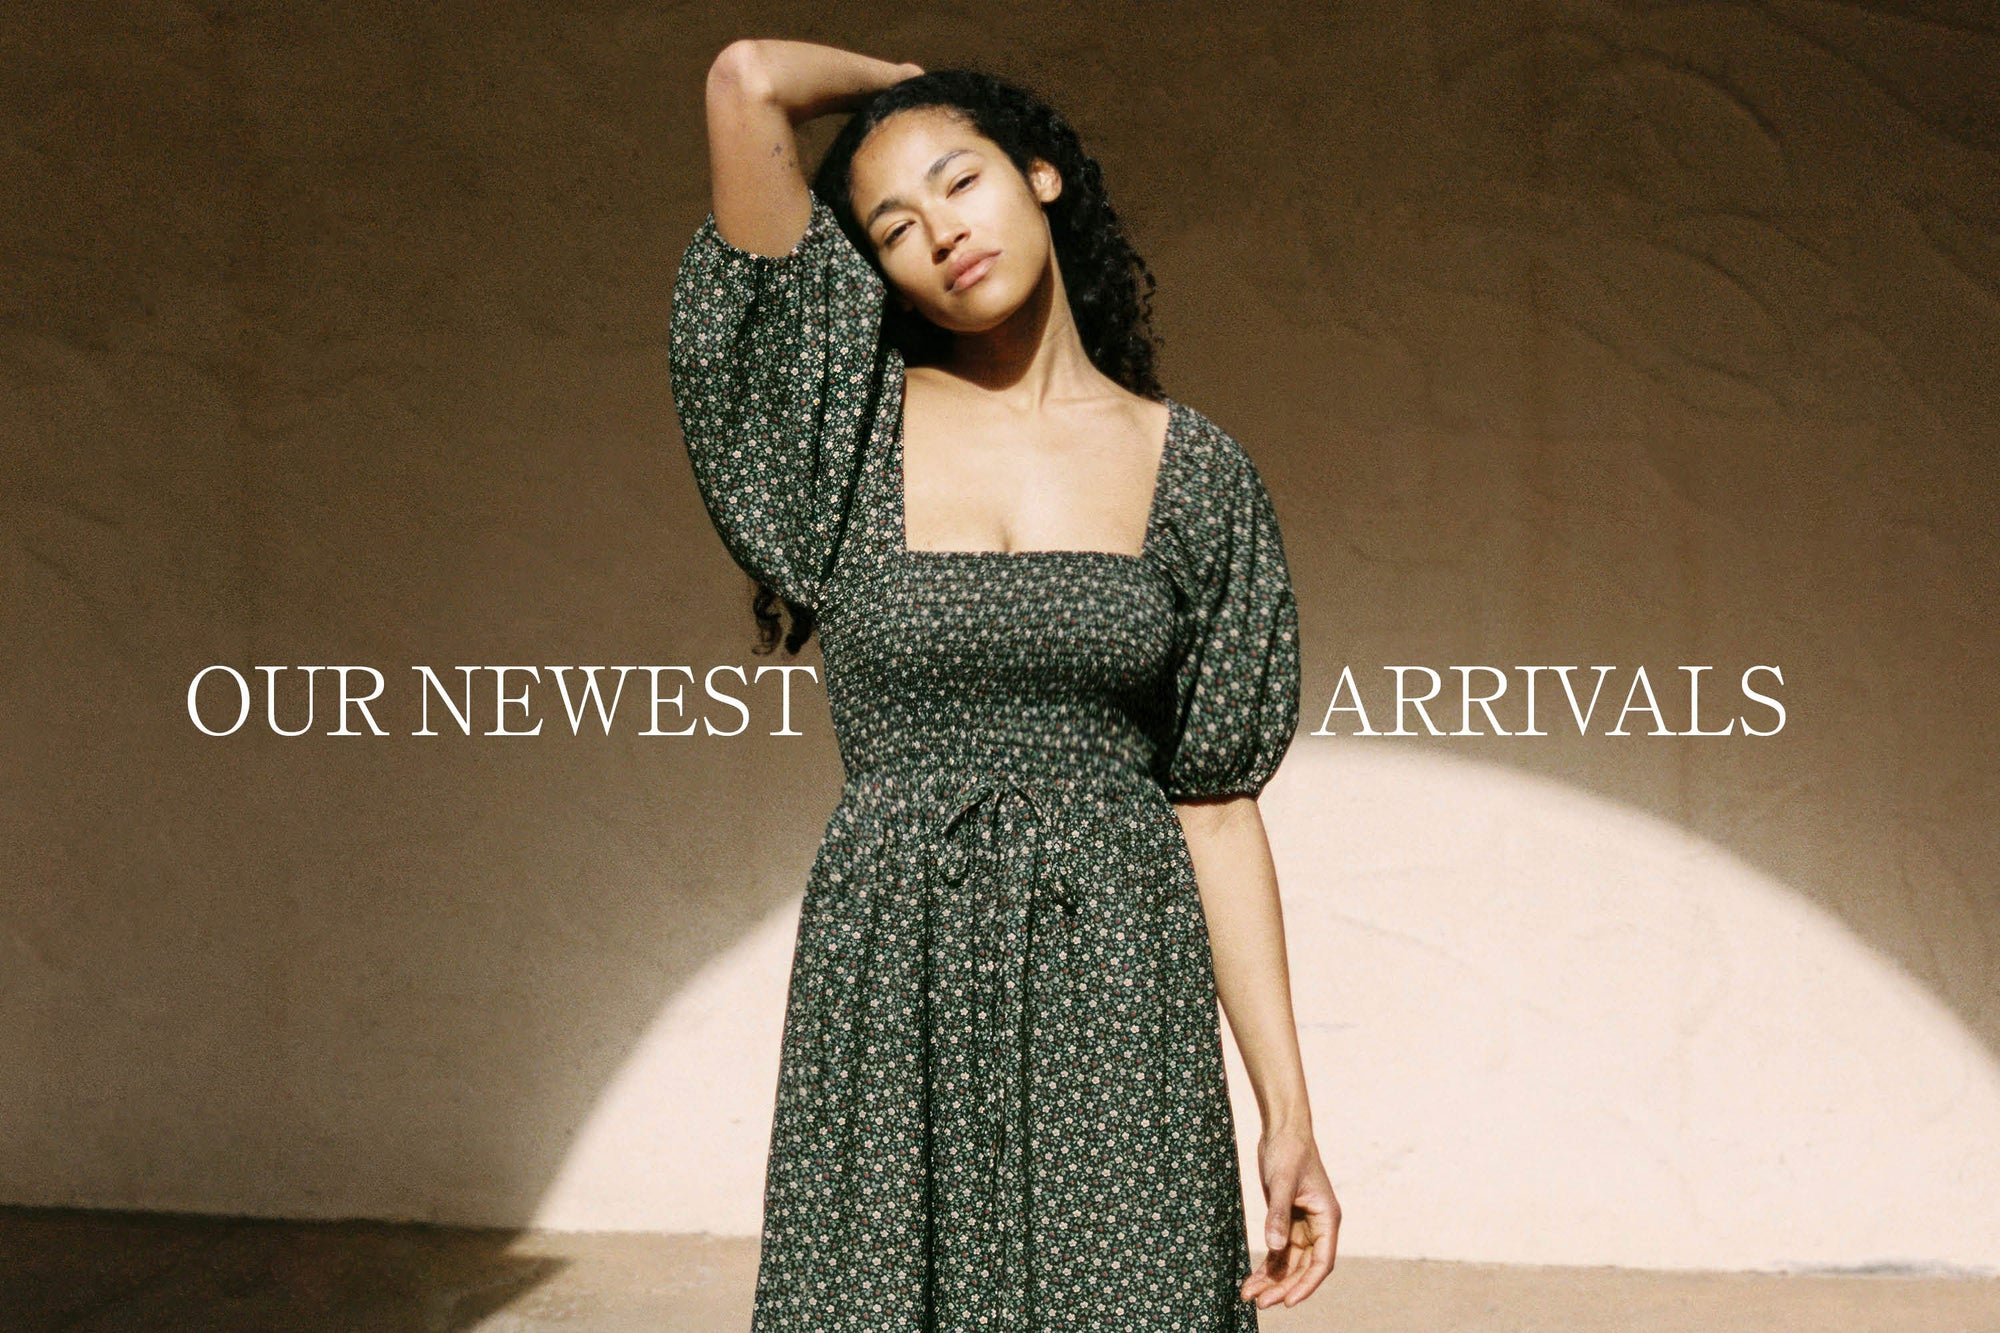 Christy Dawn - Regenerative, Ethical & Timeless Dresses & Accessories